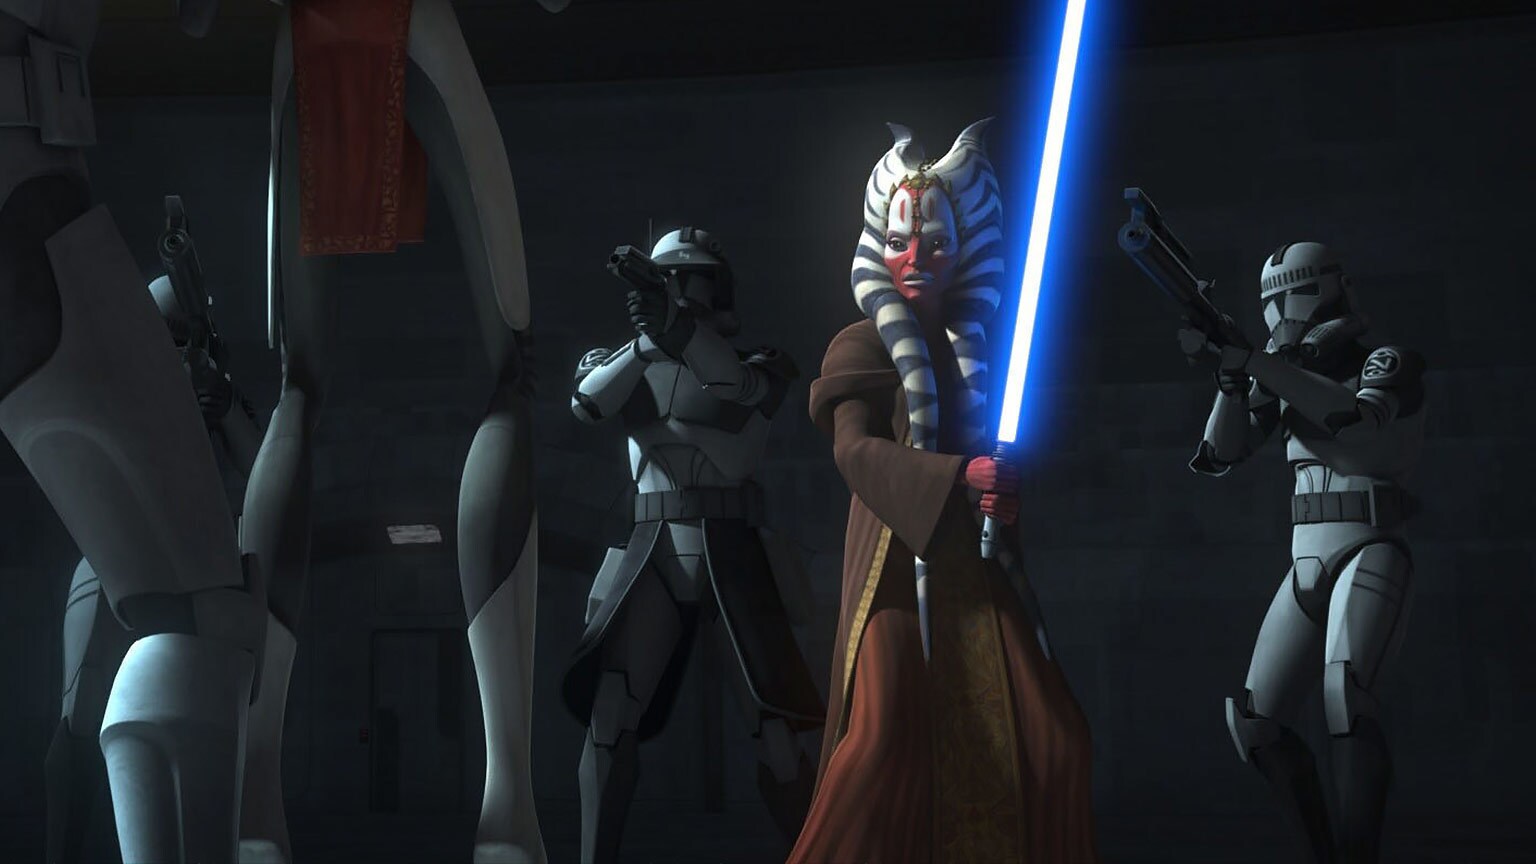 The Clone Wars Rewatch: Fives the "Fugitive"